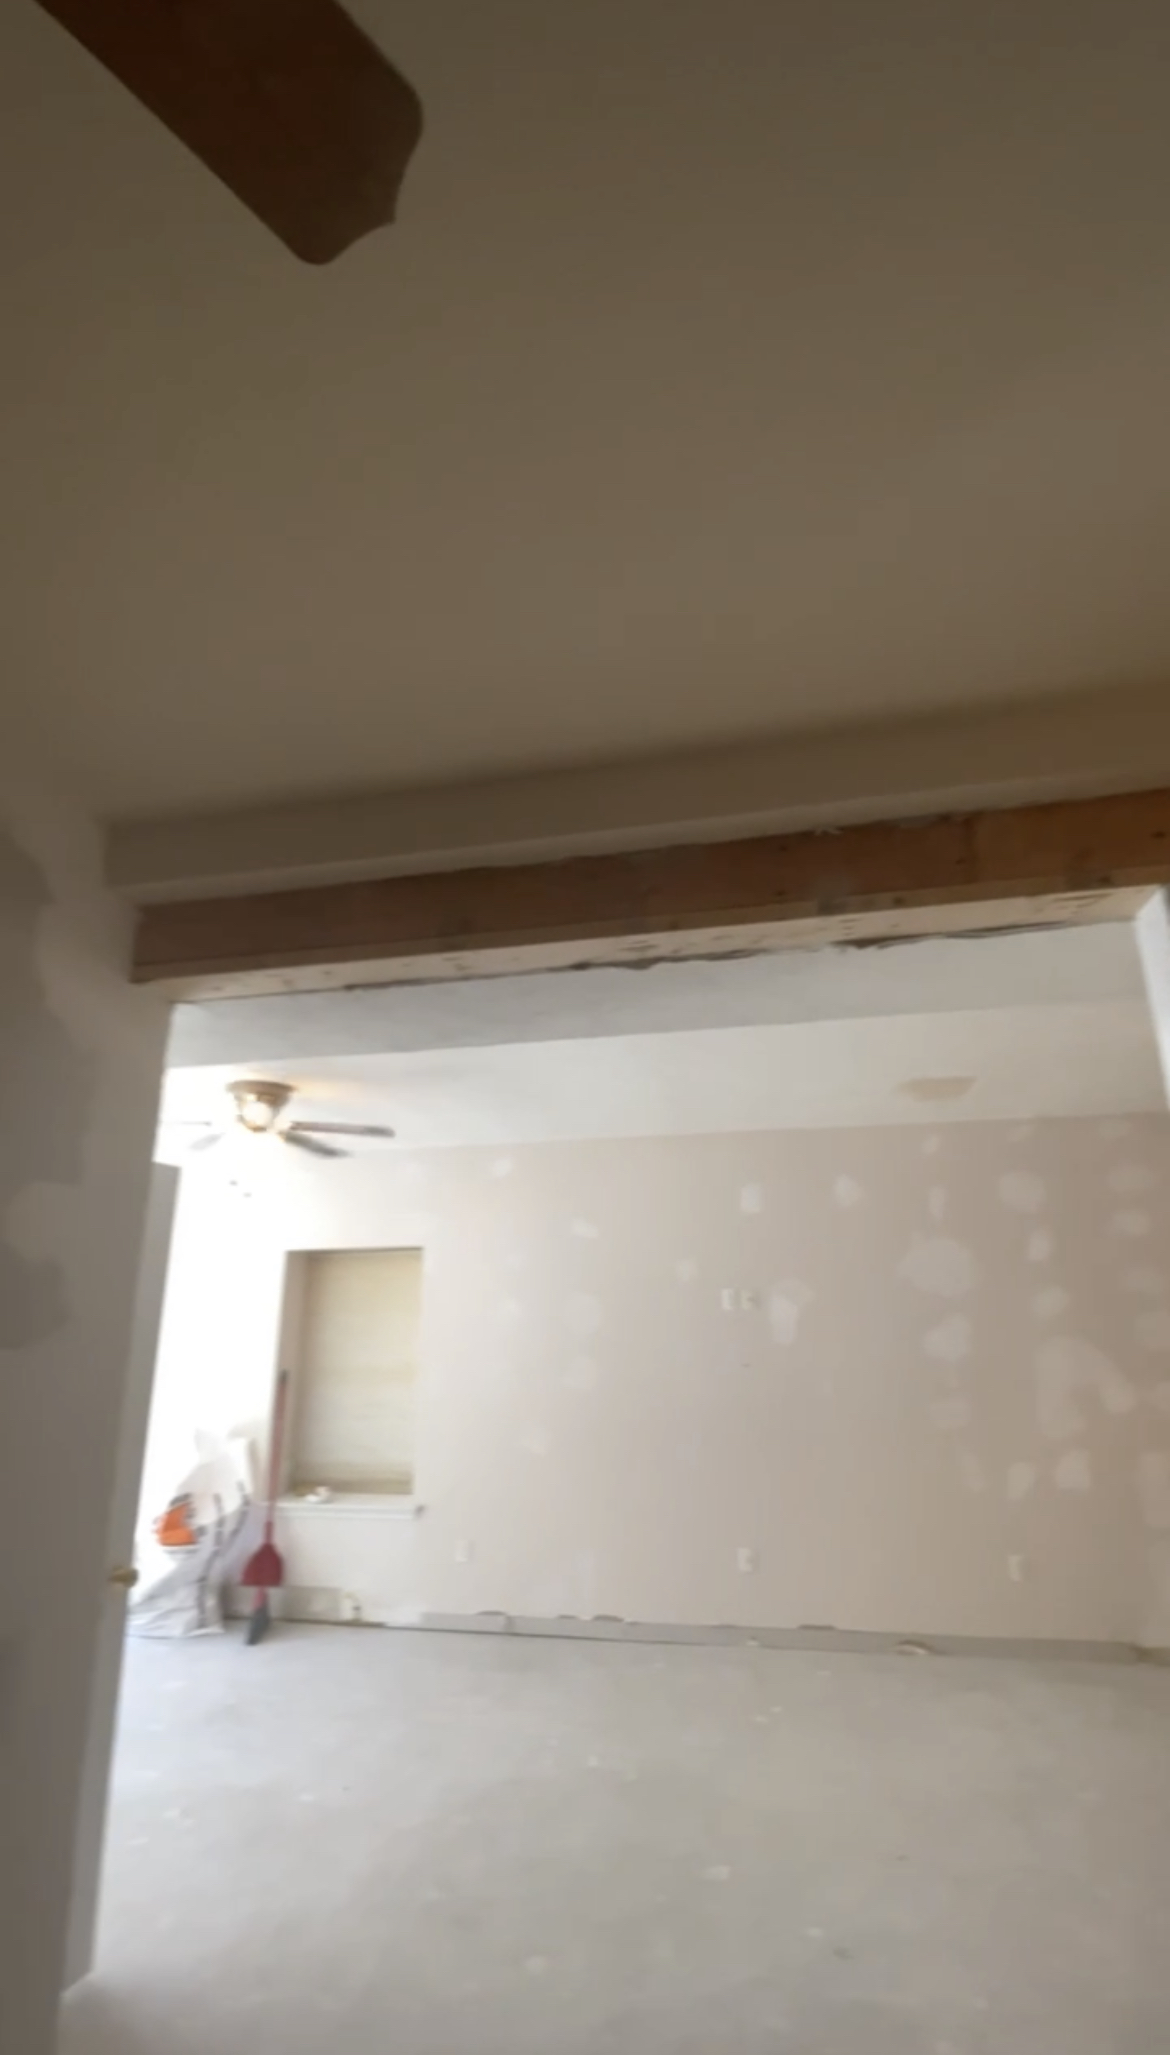 DESTROYED MAIN BEAM AND HEADERS IN BASEMENT 